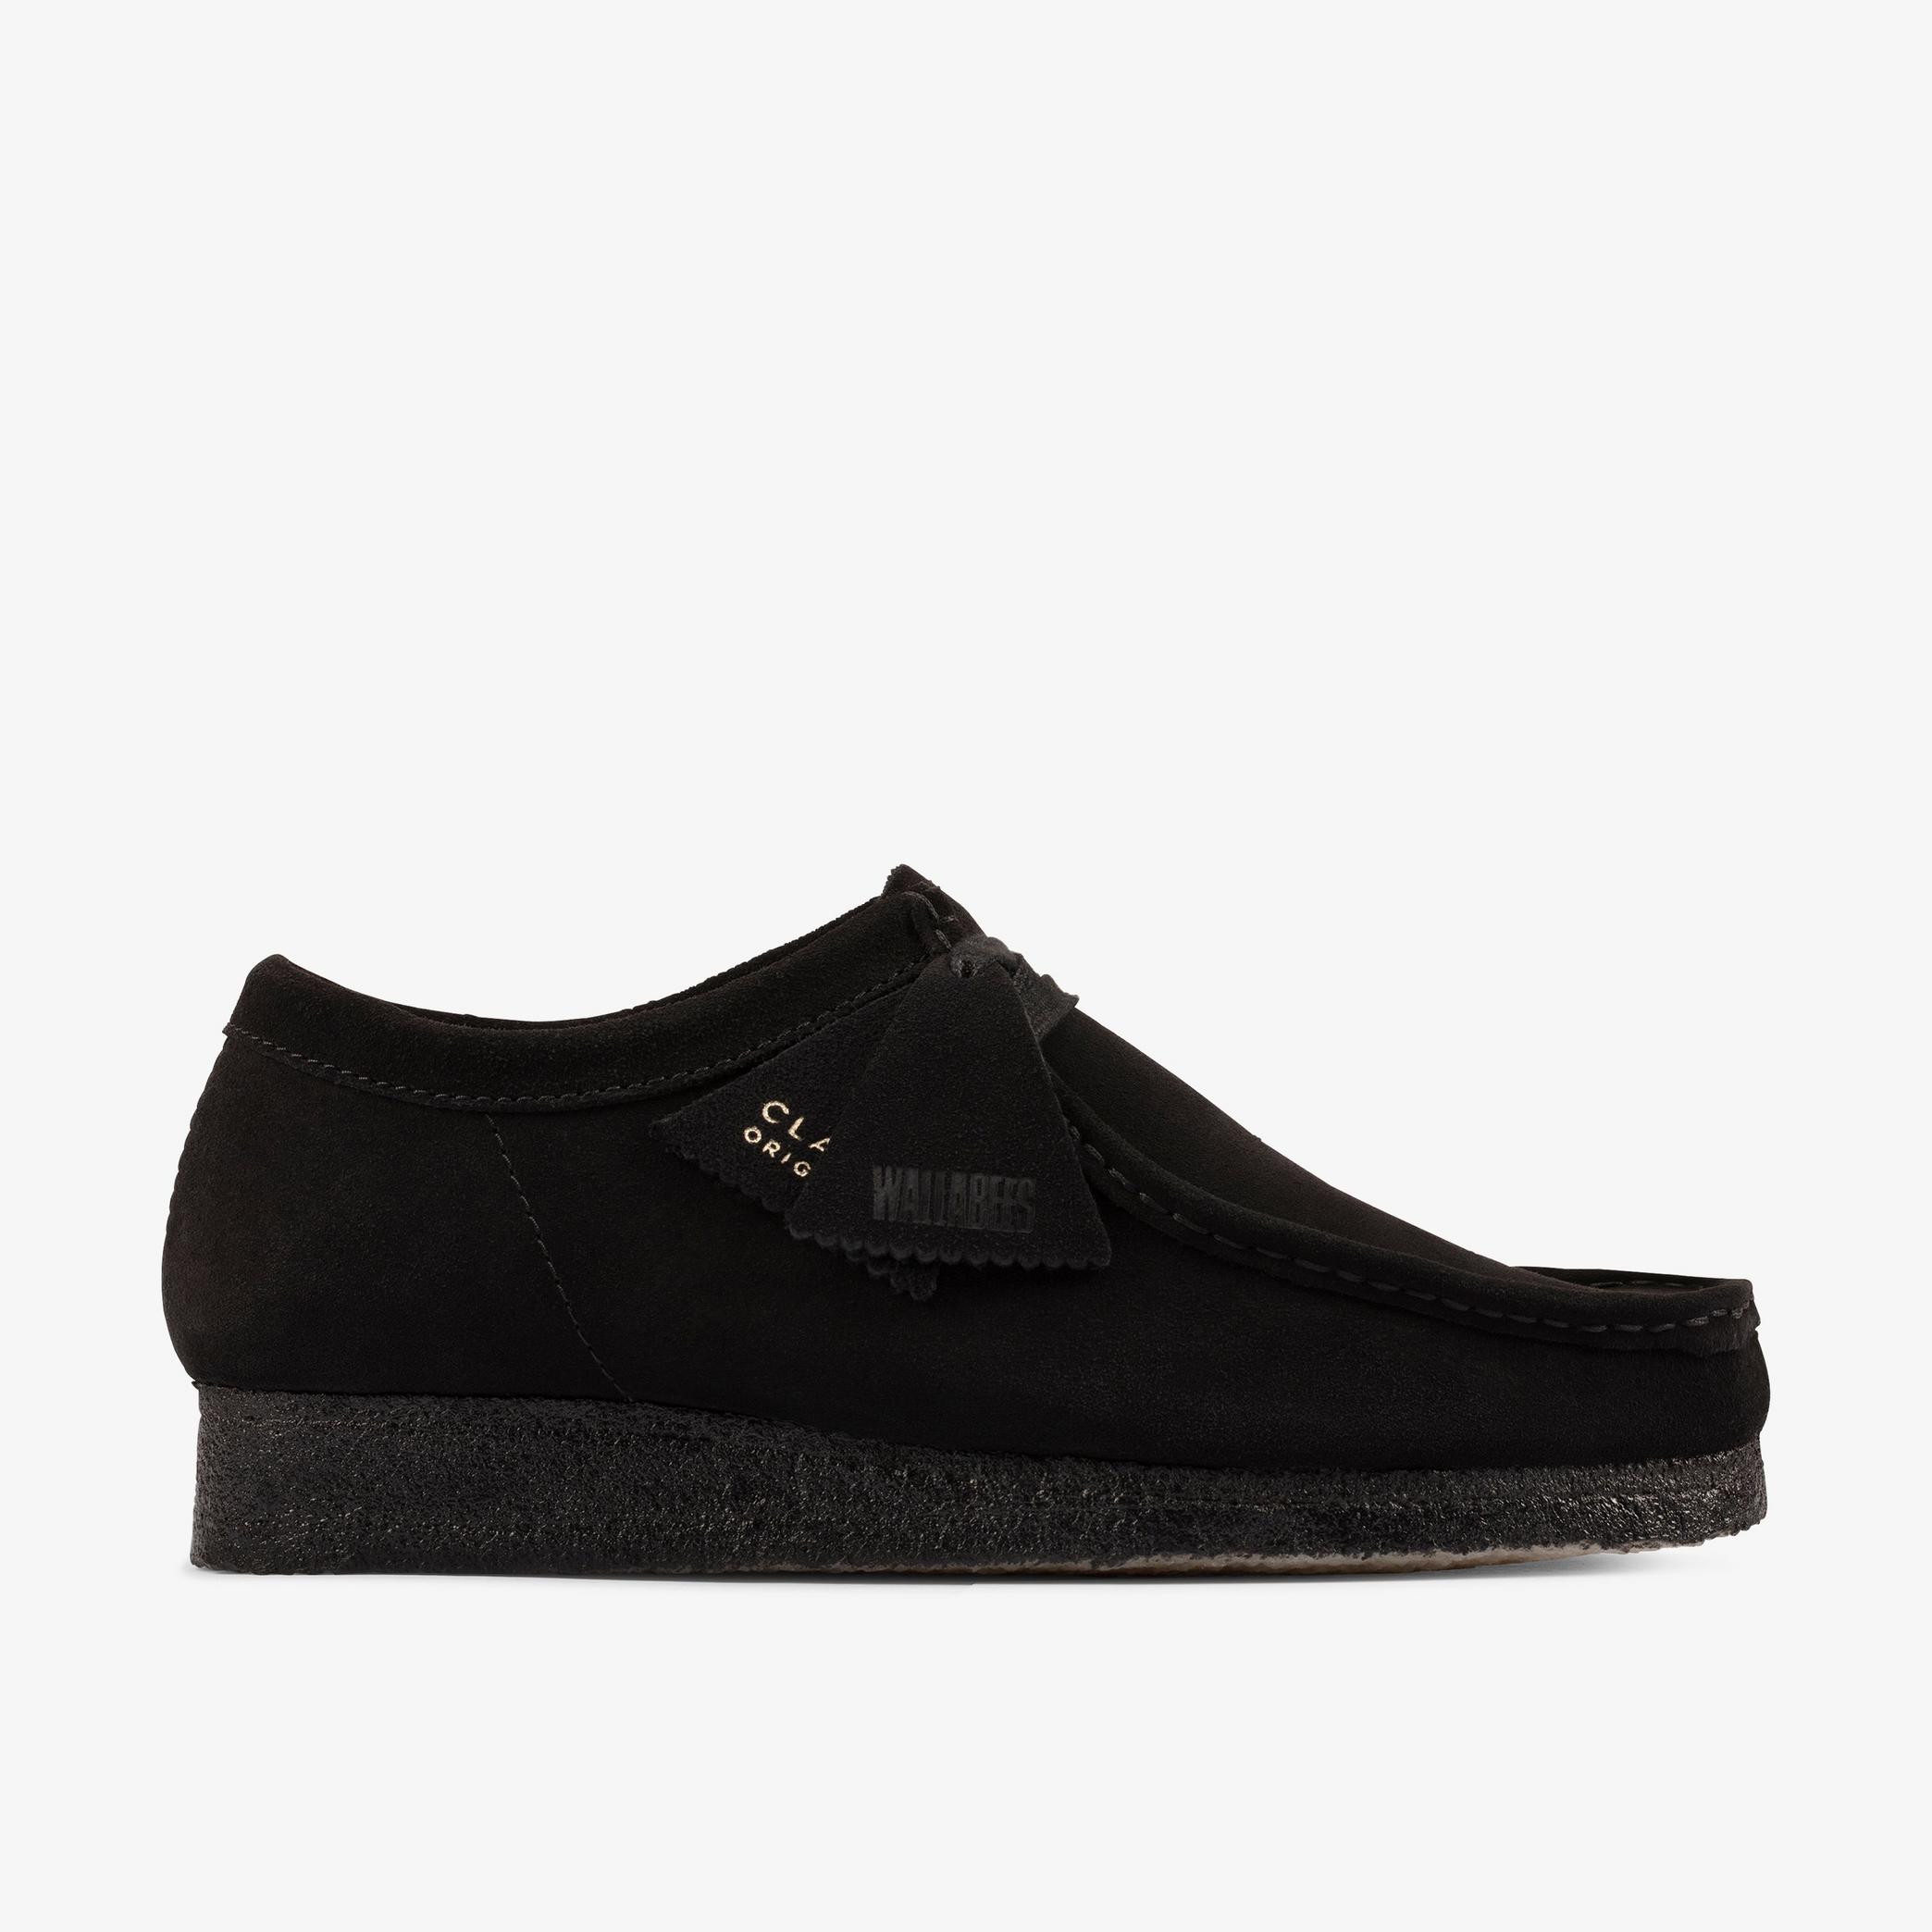 Wallabee Black Suede Shoes, view 1 of 6